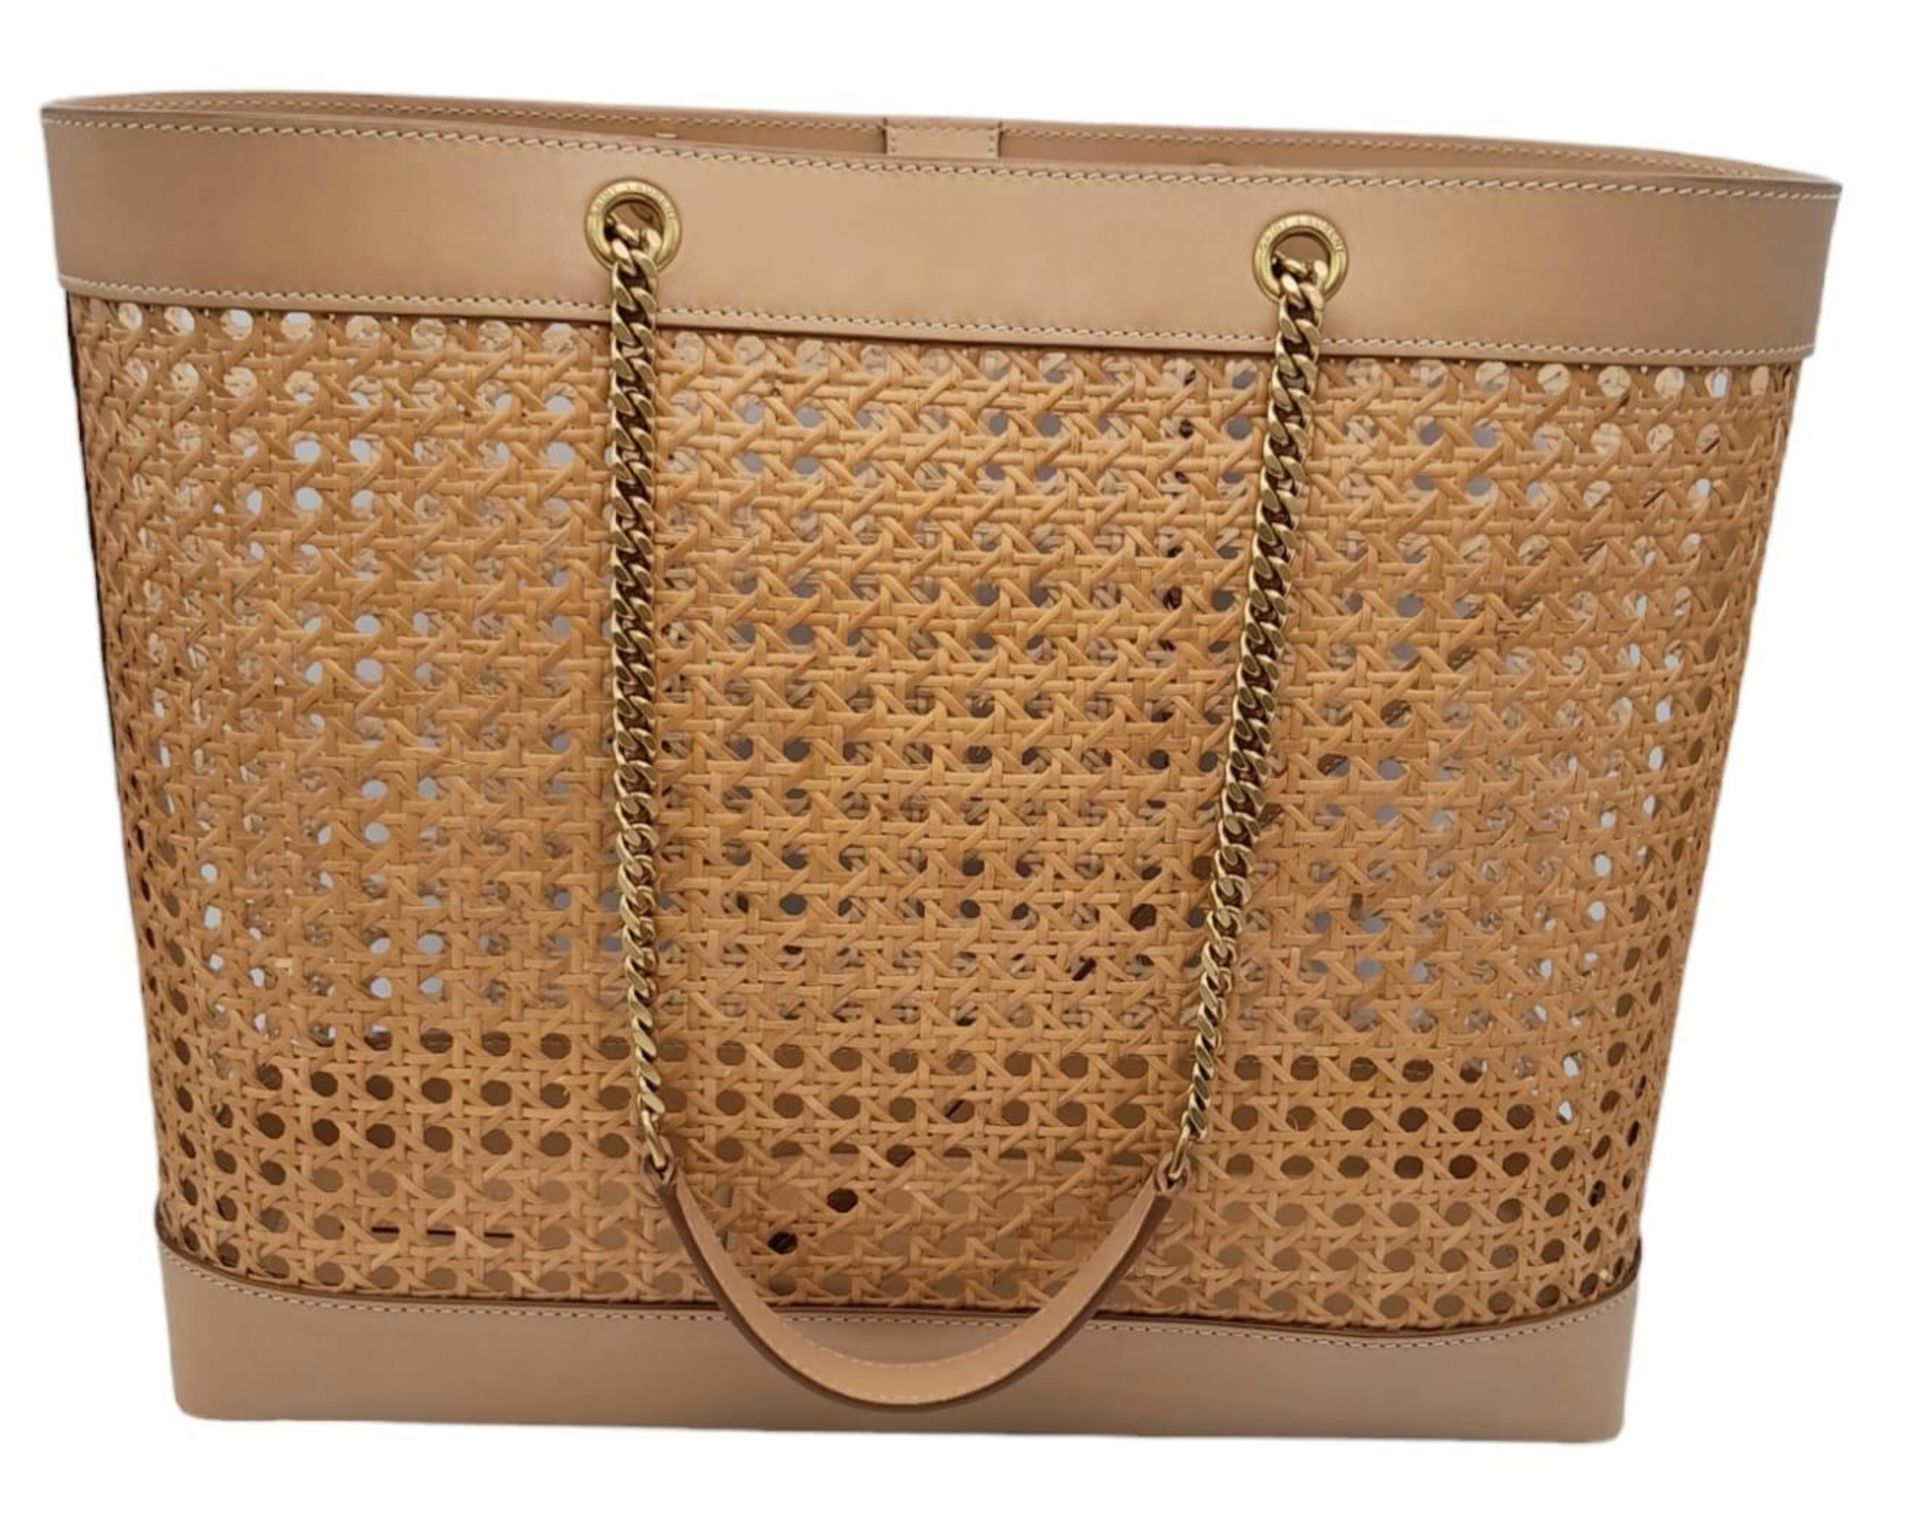 A Saint Laurent Beige Tote Bag. Woven rattan and leather trim exterior. Magnetic closure, gold-toned - Image 3 of 12